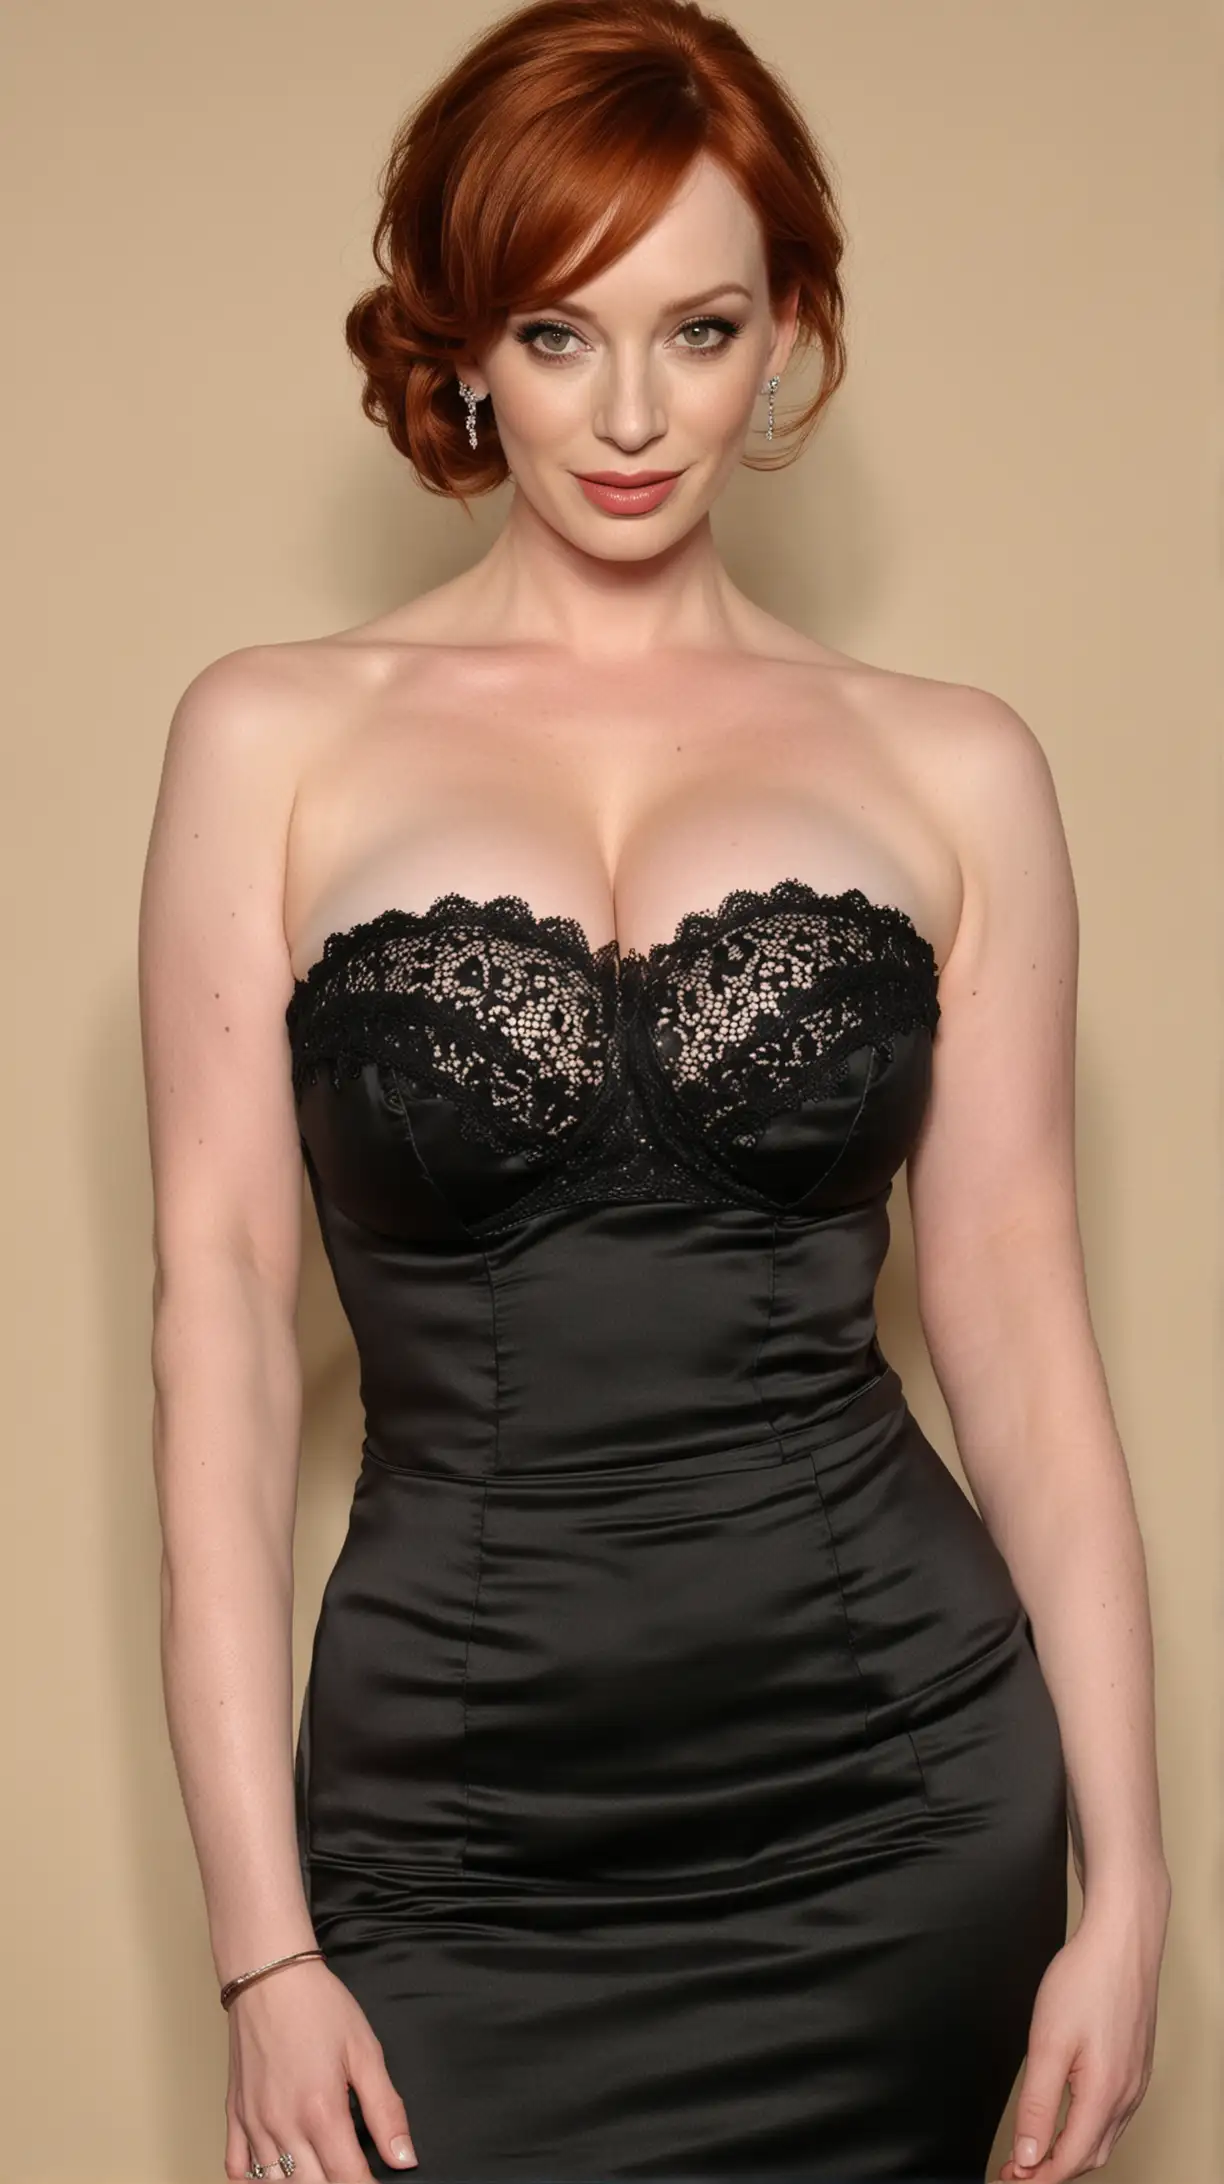 Elegant Christina Hendricks in Strapless Satin Top with Lace Accents